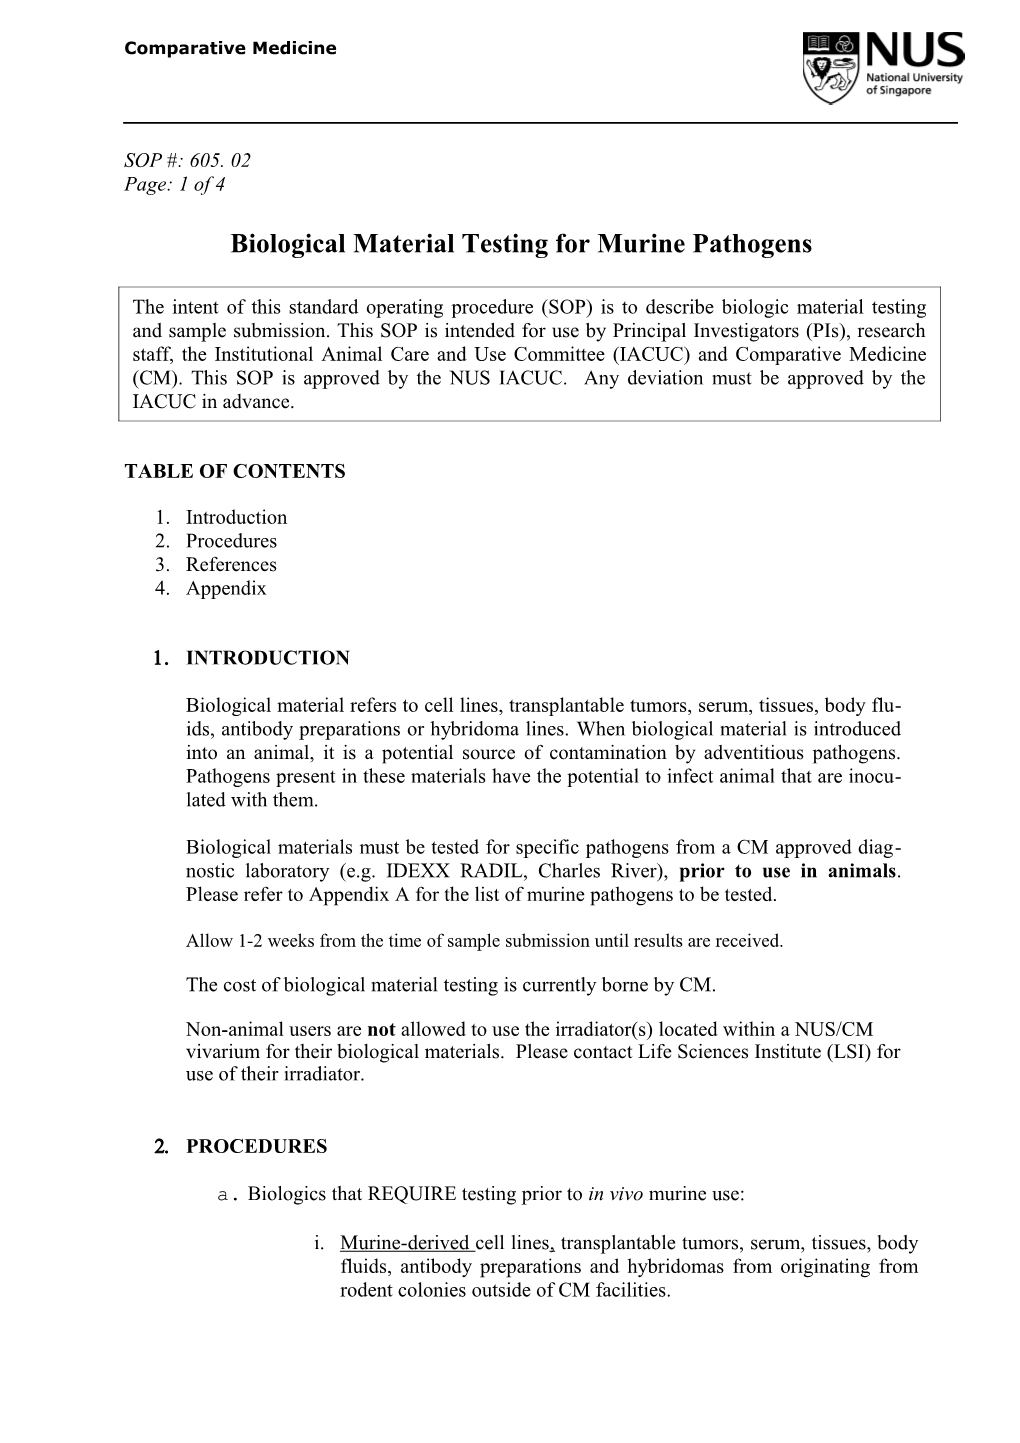 Biological Material Testing for Murine Pathogens